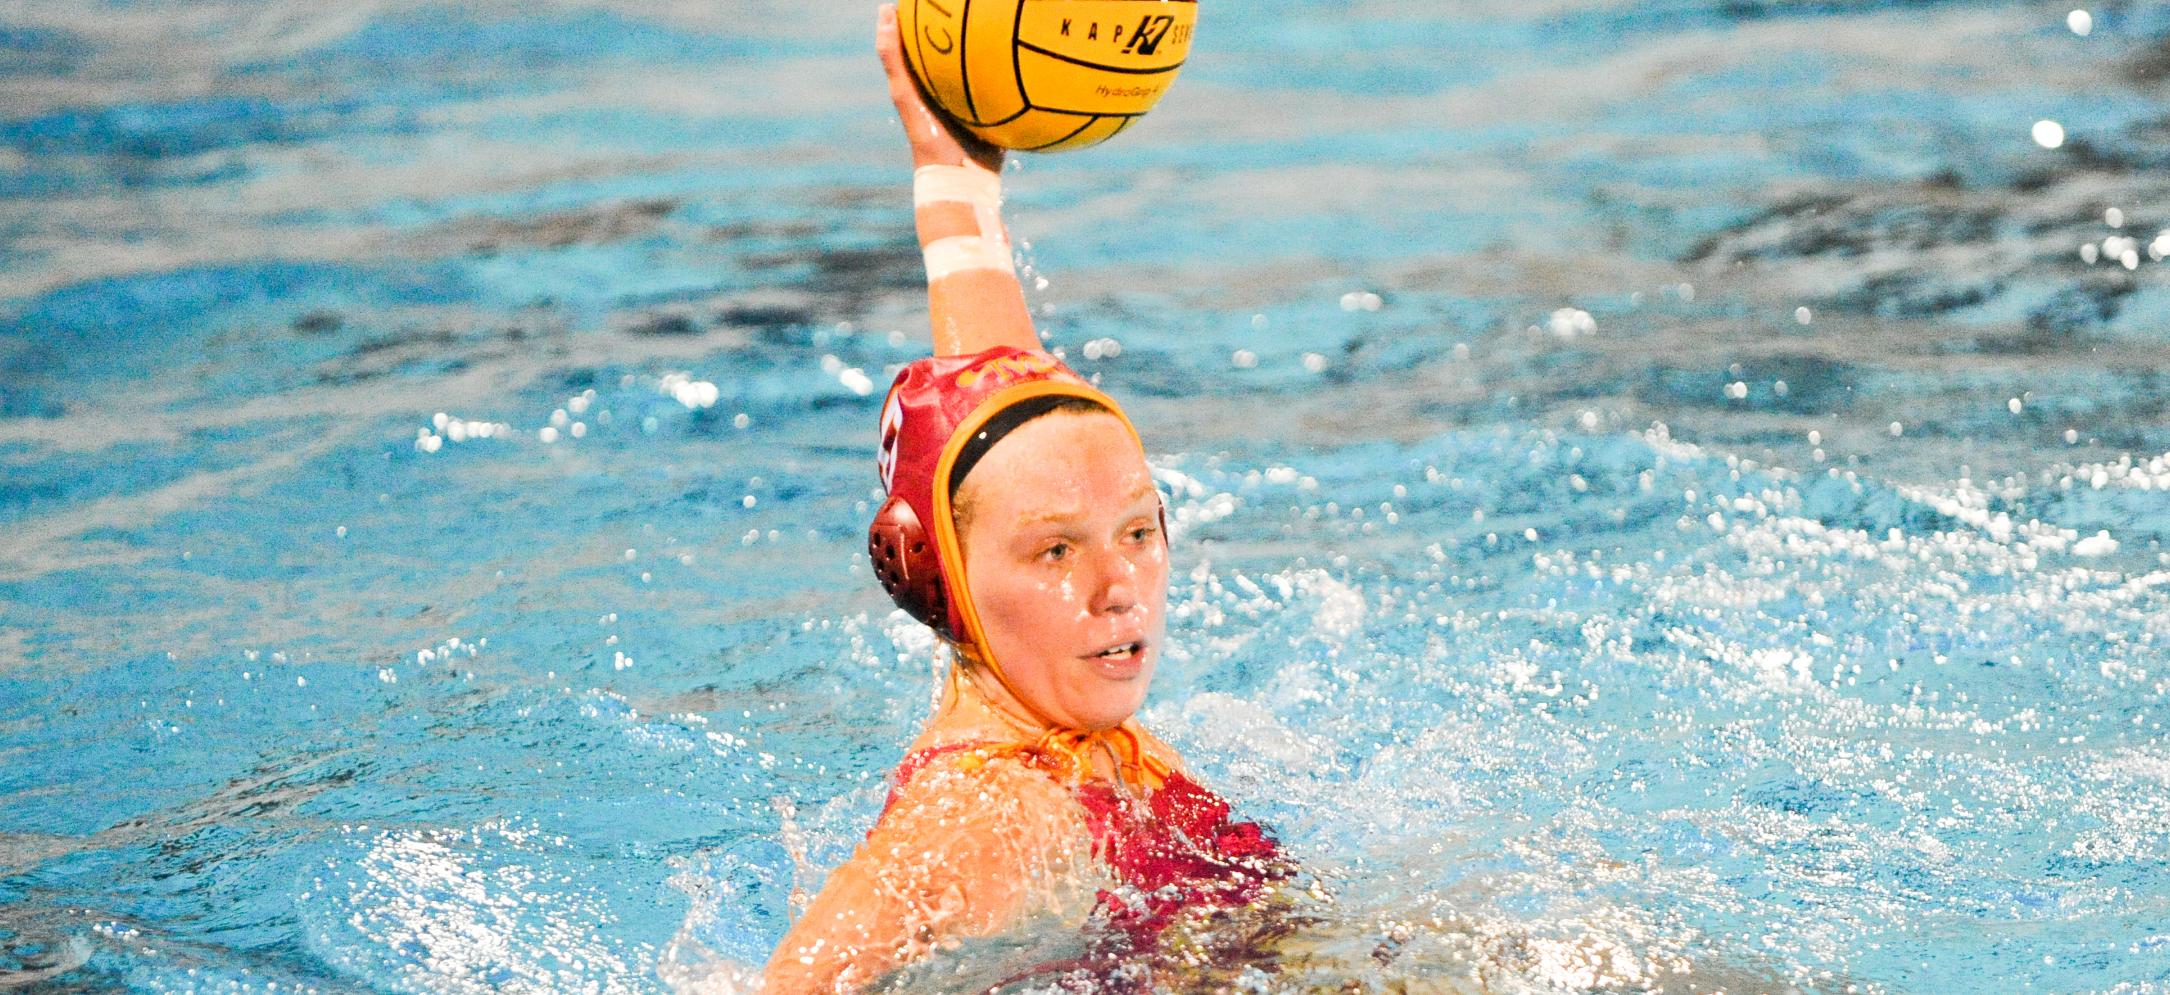 Trio of goals in early minutes sink CMS against Pomona-Pitzer